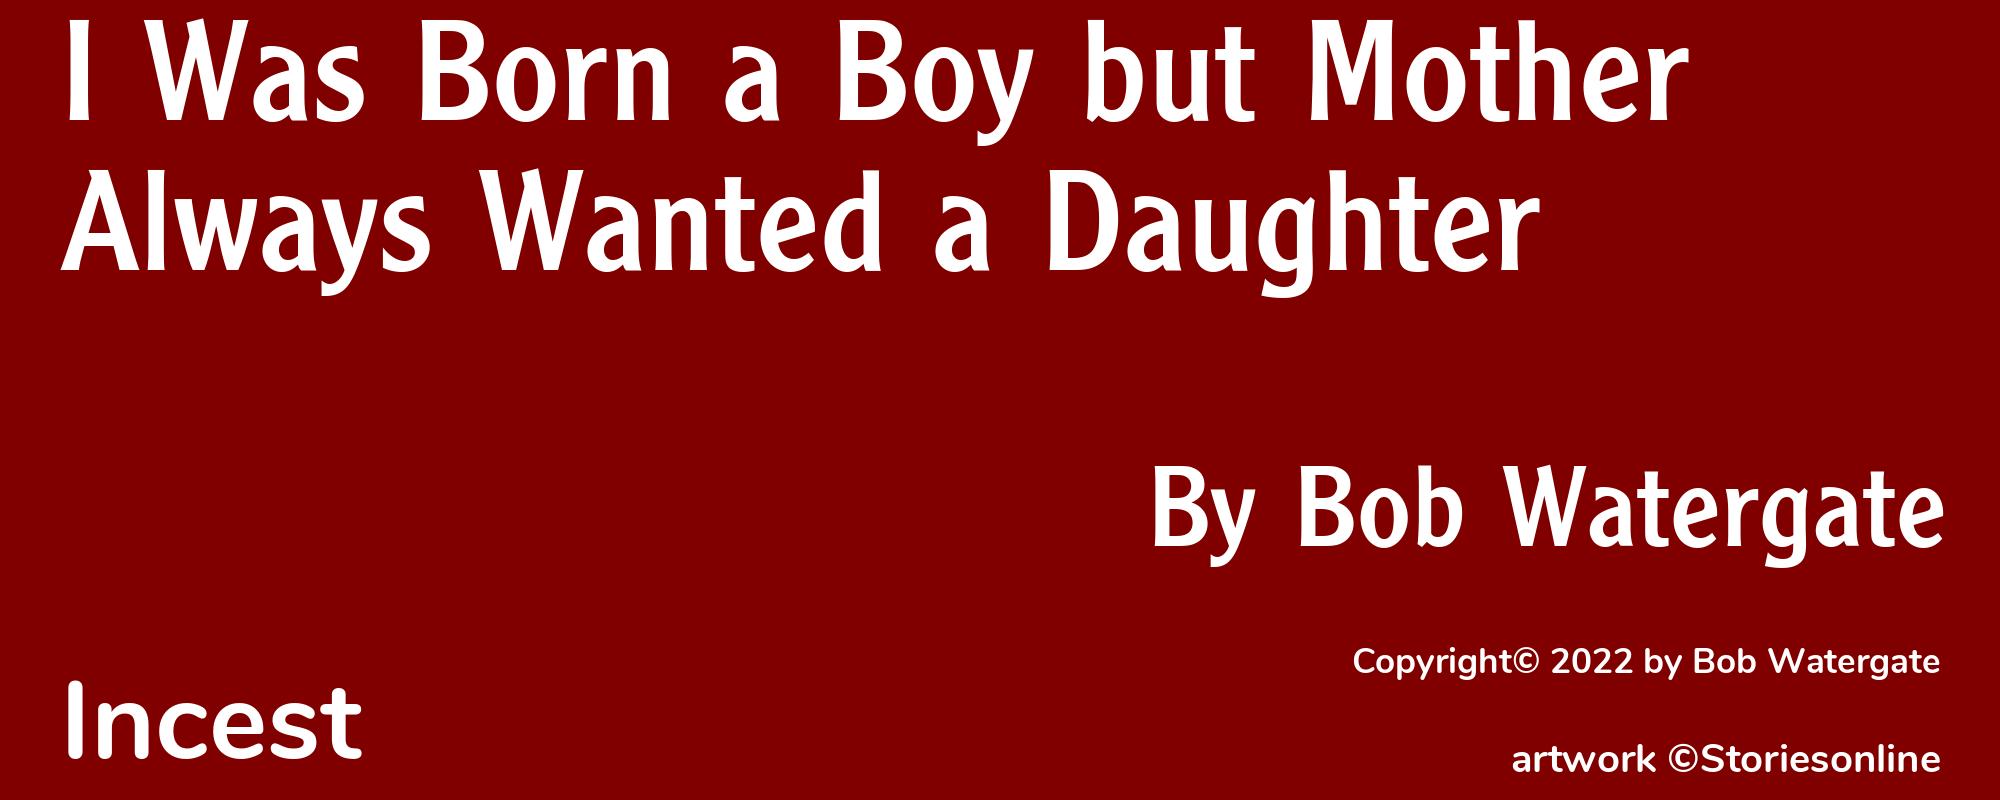 I Was Born a Boy but Mother Always Wanted a Daughter - Cover